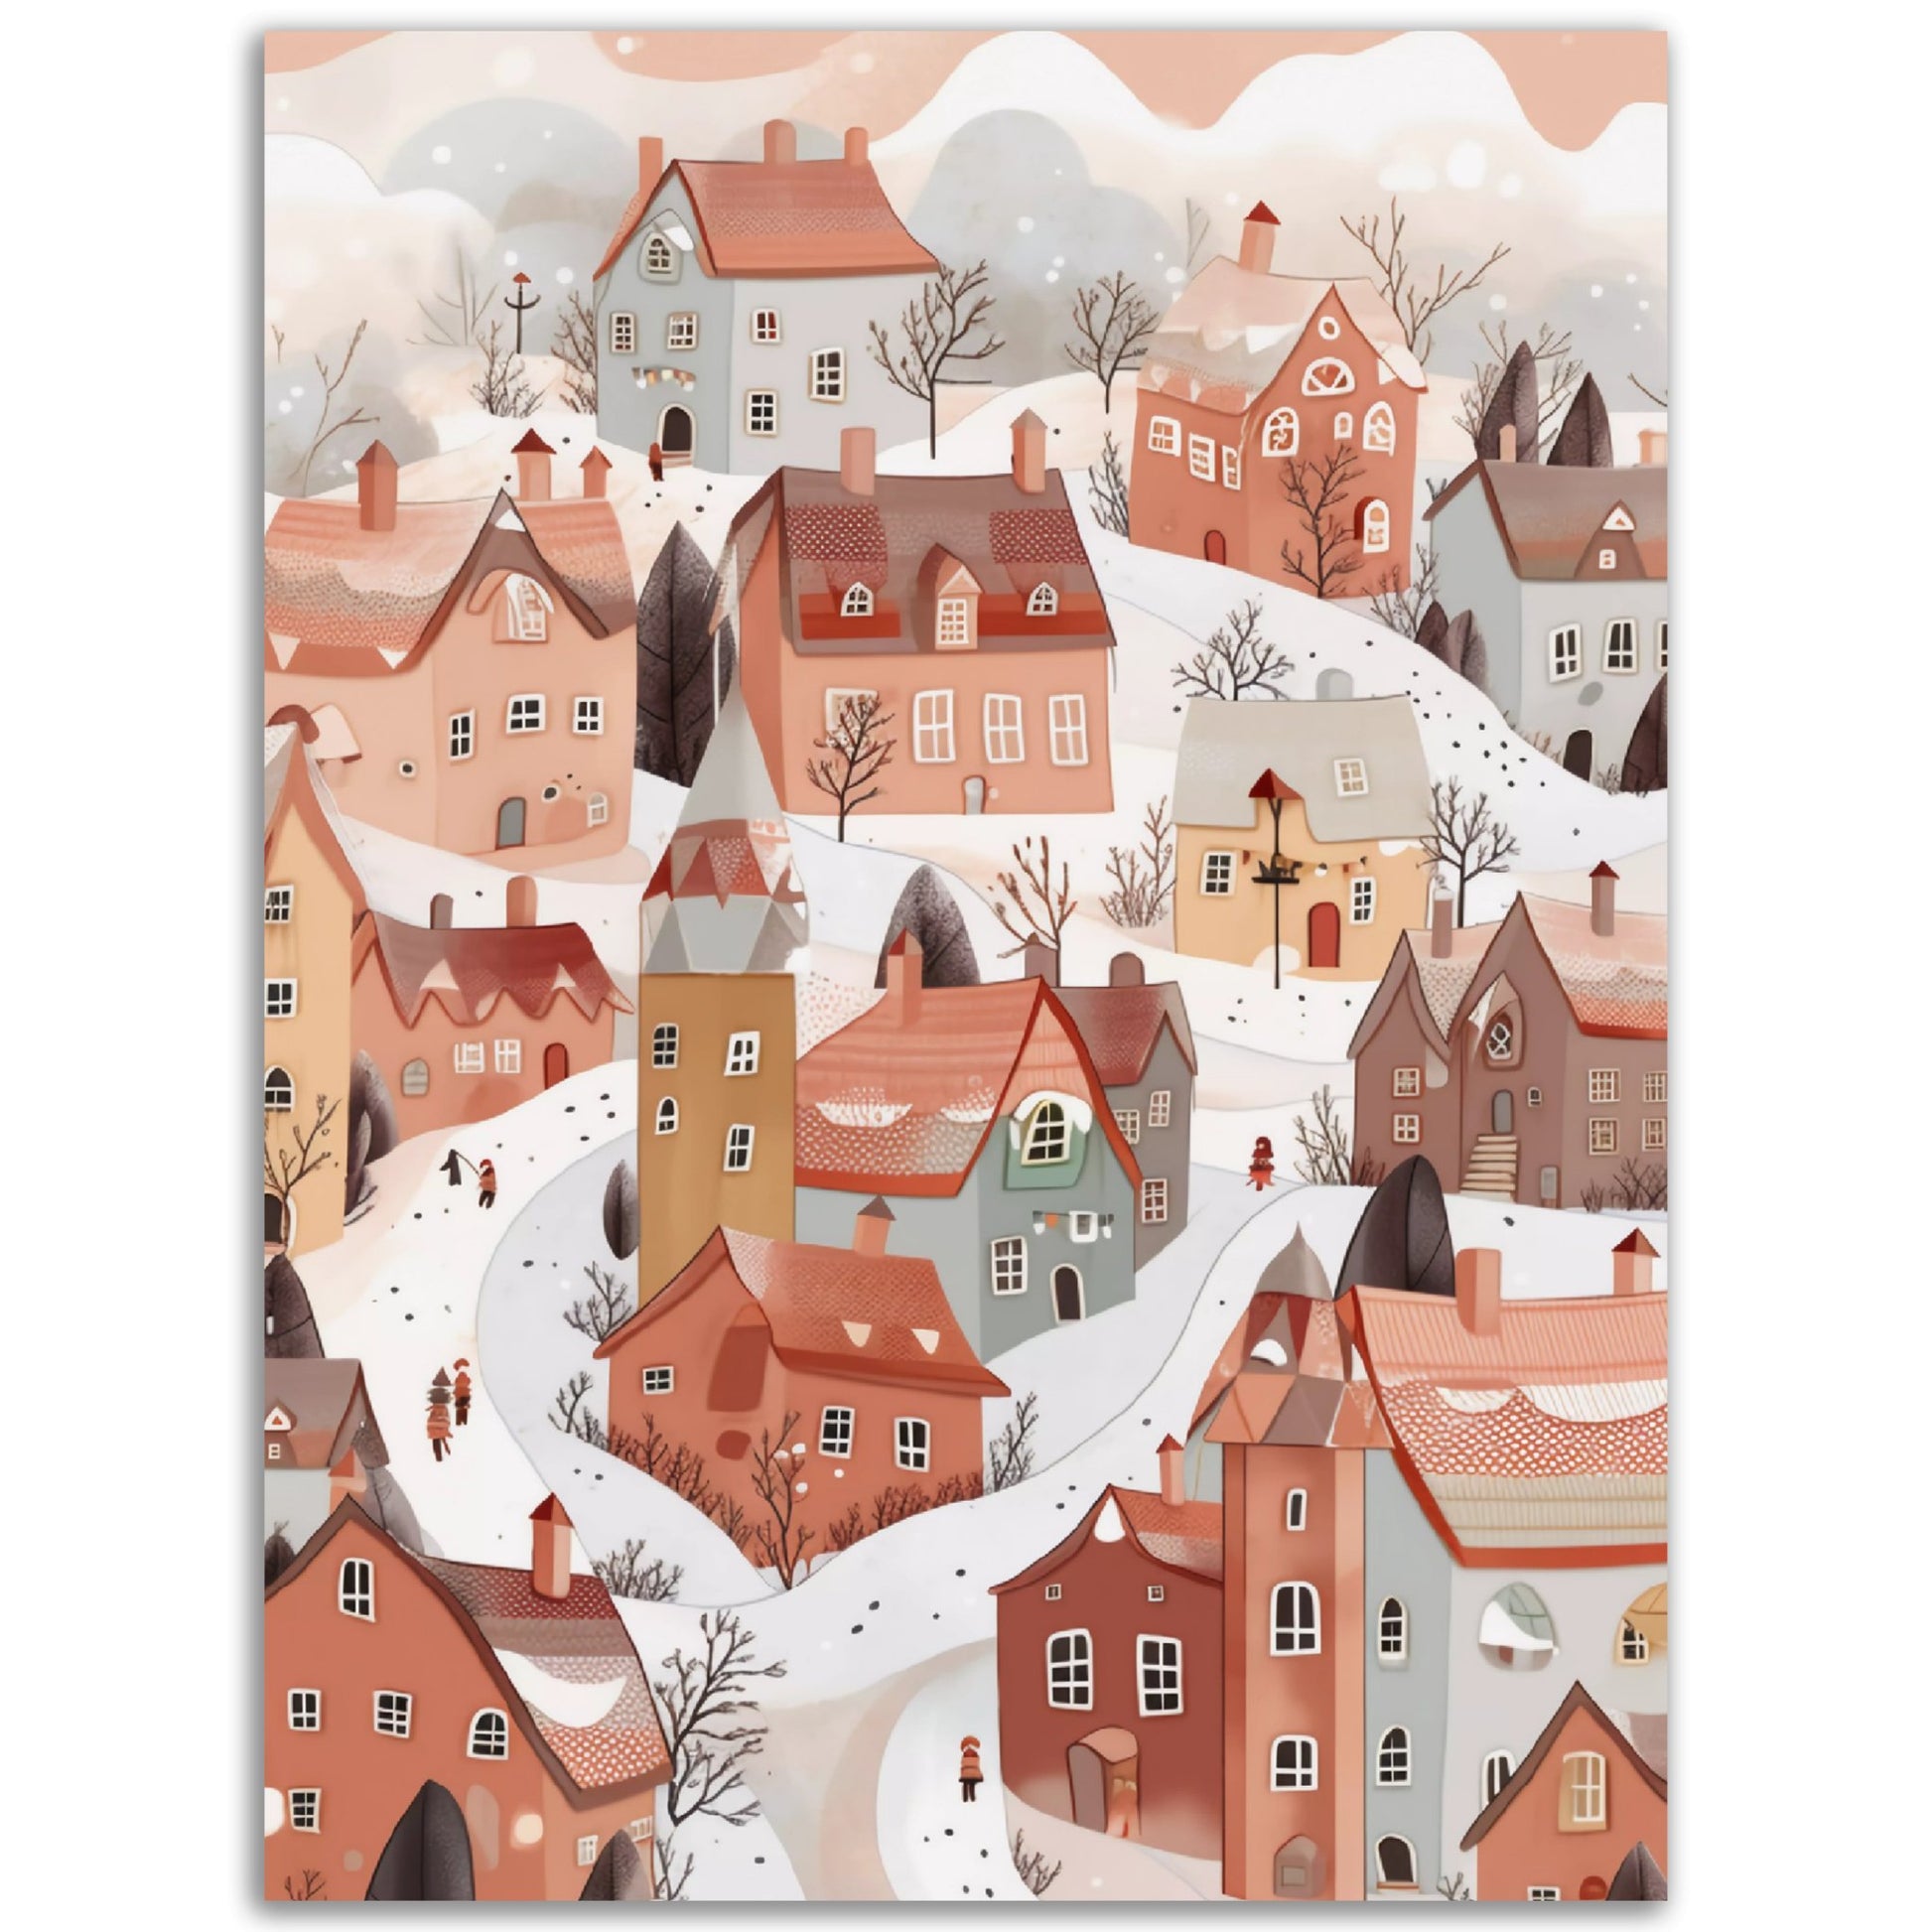 A colorful Winter Village wall art of a snowy town with houses and trees.